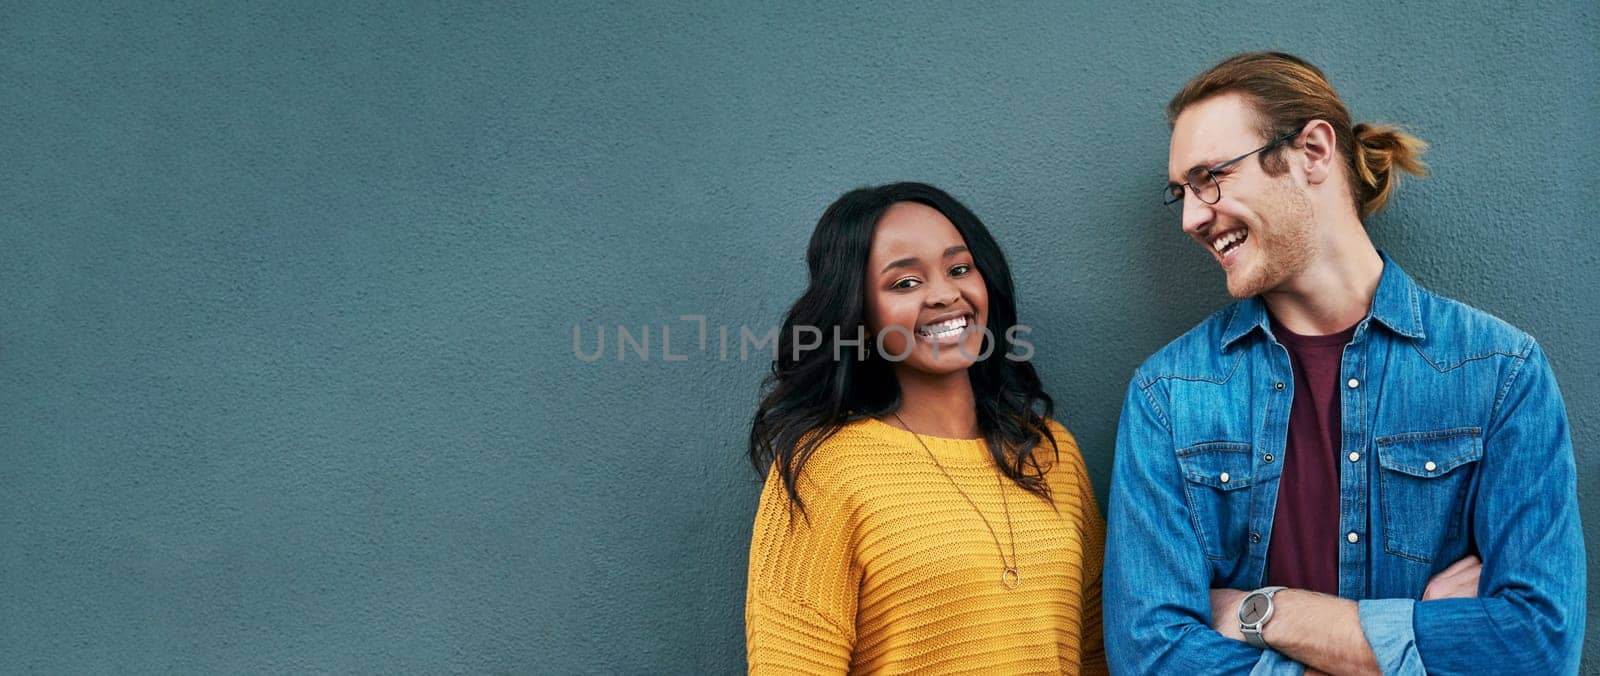 Happy, conversation and couple by wall with mockup space for advertising, promotion or marketing. Smile, talking and young interracial man and woman in discussion together by gray background mock up